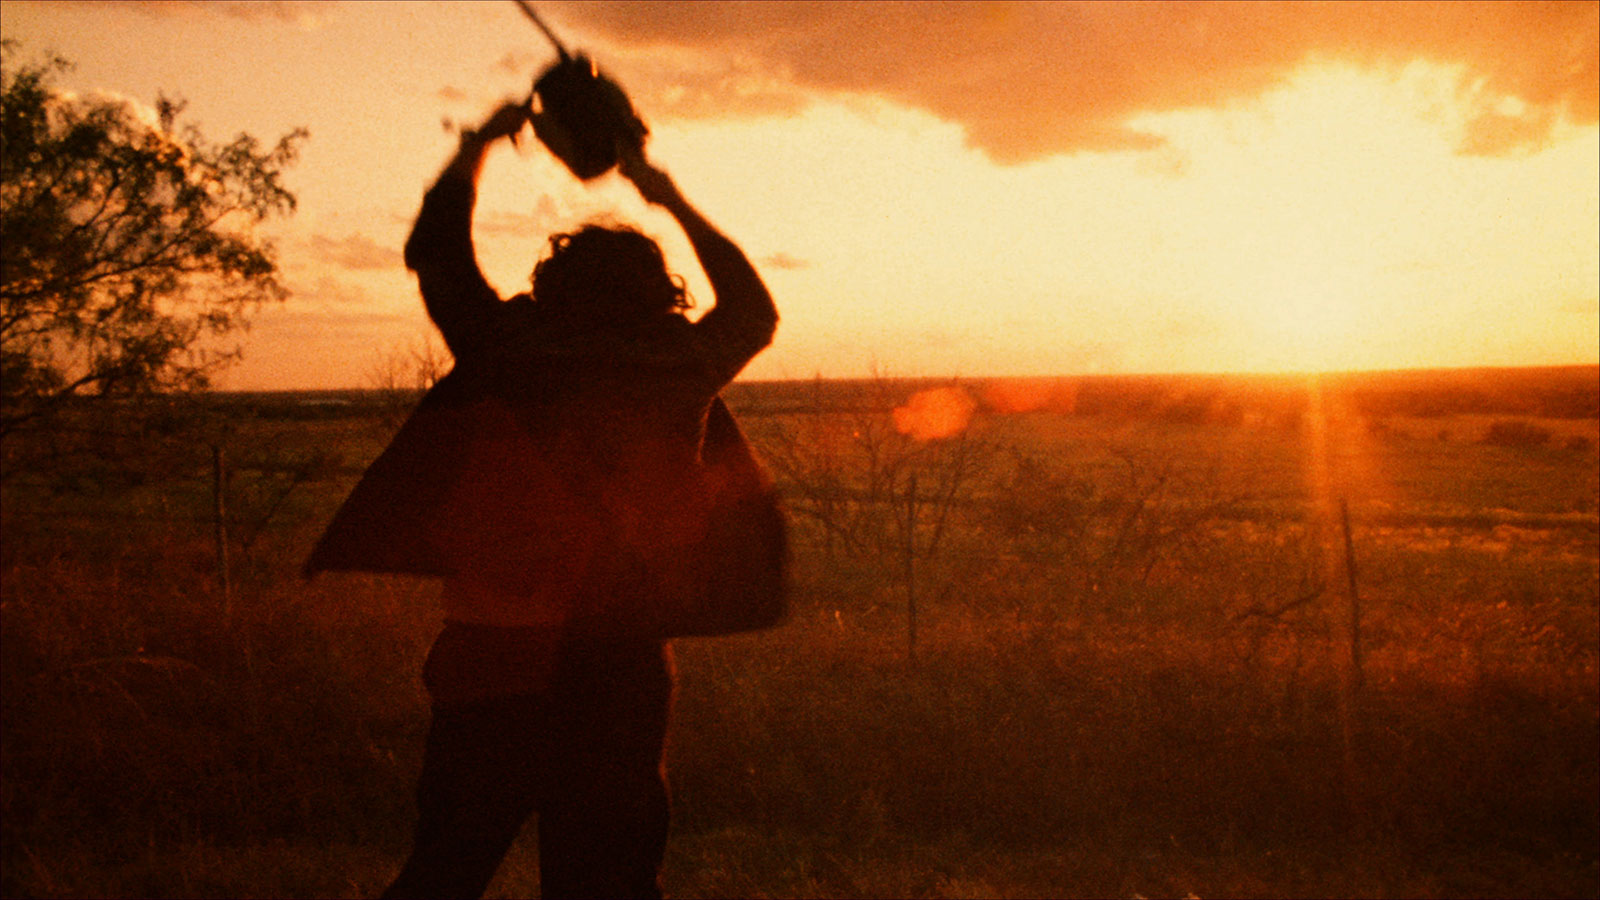 The Texas Chain Saw Massacre on Twitter Looking for new phone wallpapers  We have you covered Enjoy httpstcoPJNv4W9sLB  Twitter